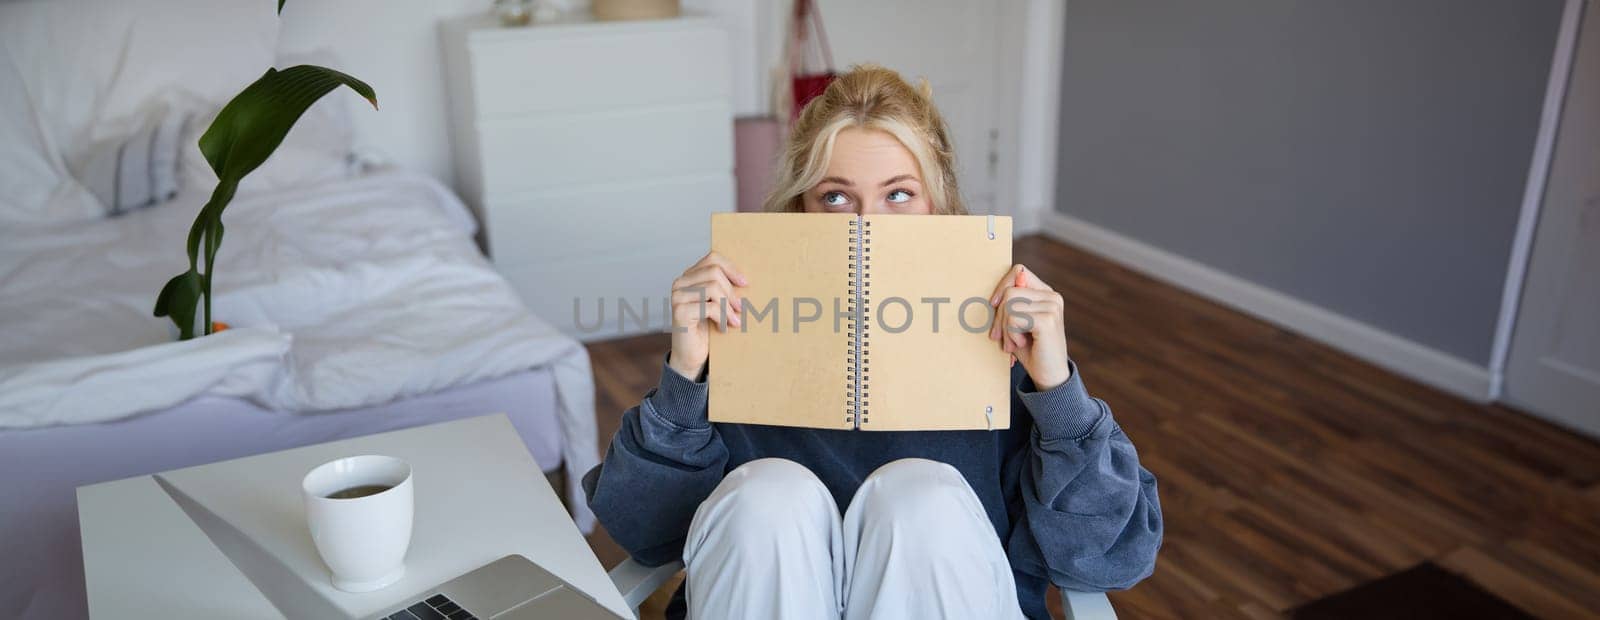 Portrait of cute blond woman, sits in front of digital camera and laptop in her room, covers face with notebook journal, records video of herself for lifestyle vlog by Benzoix